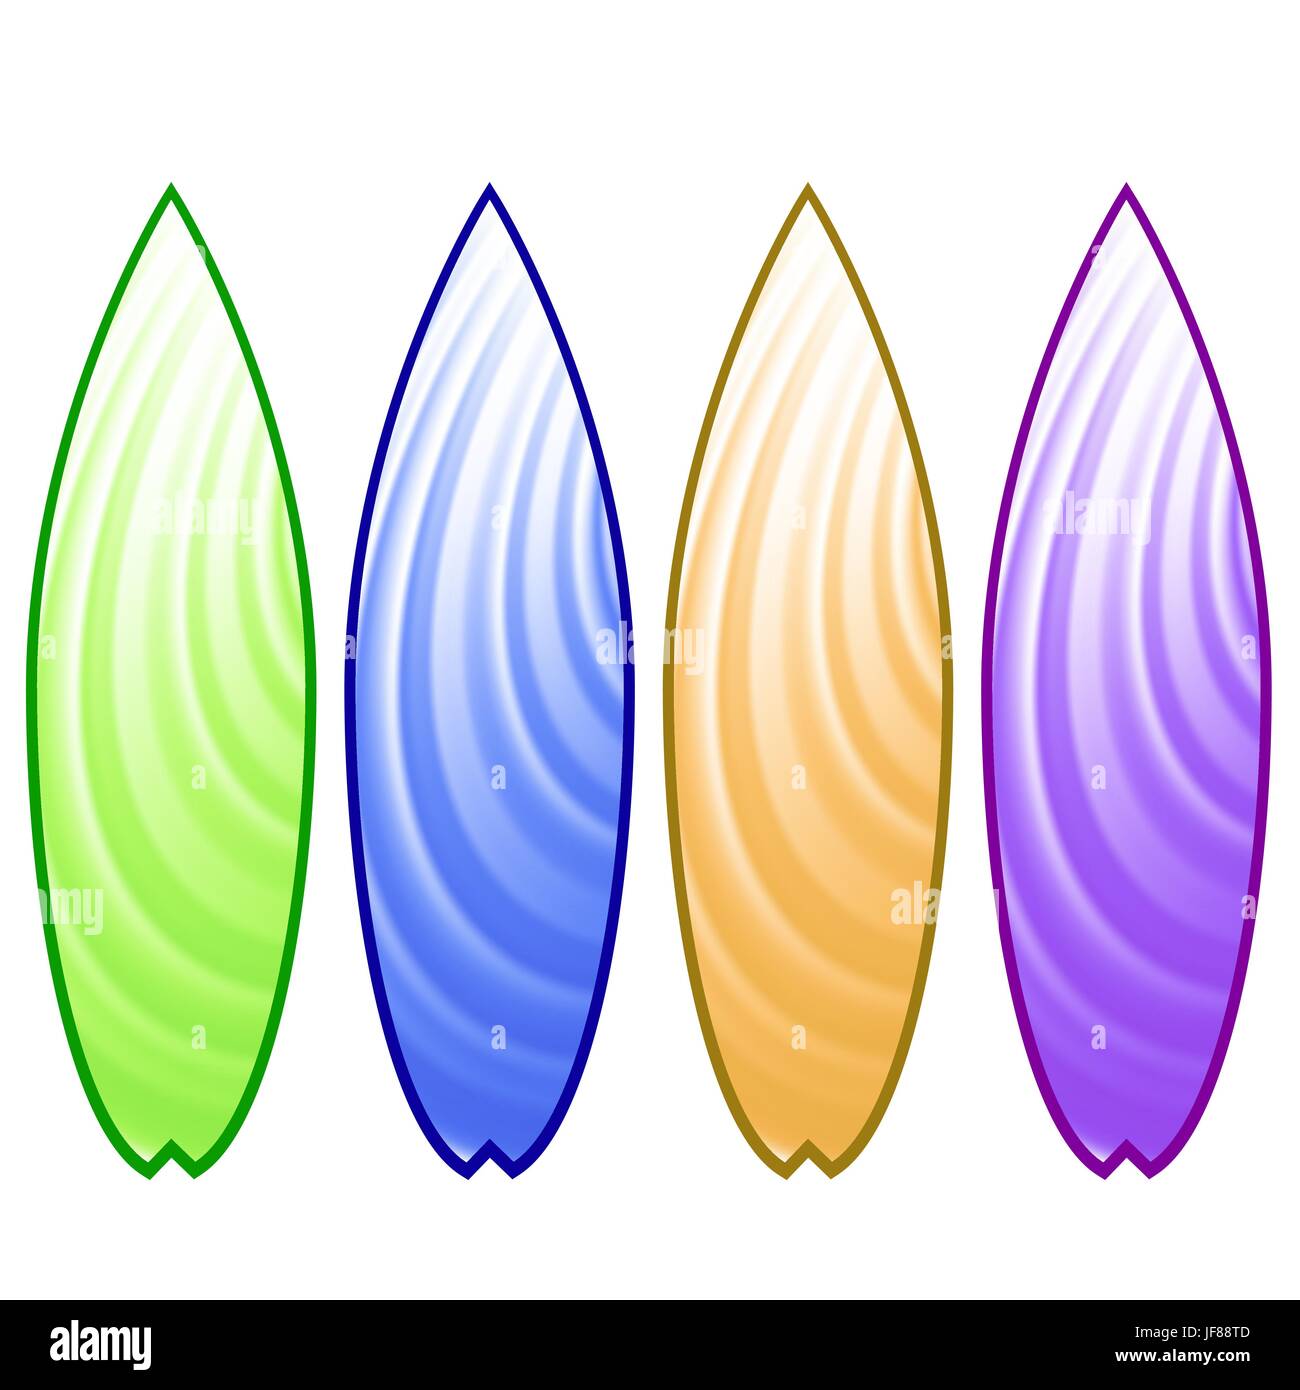 Set of Colorful Surfboards Isolated on White Background Stock Vector